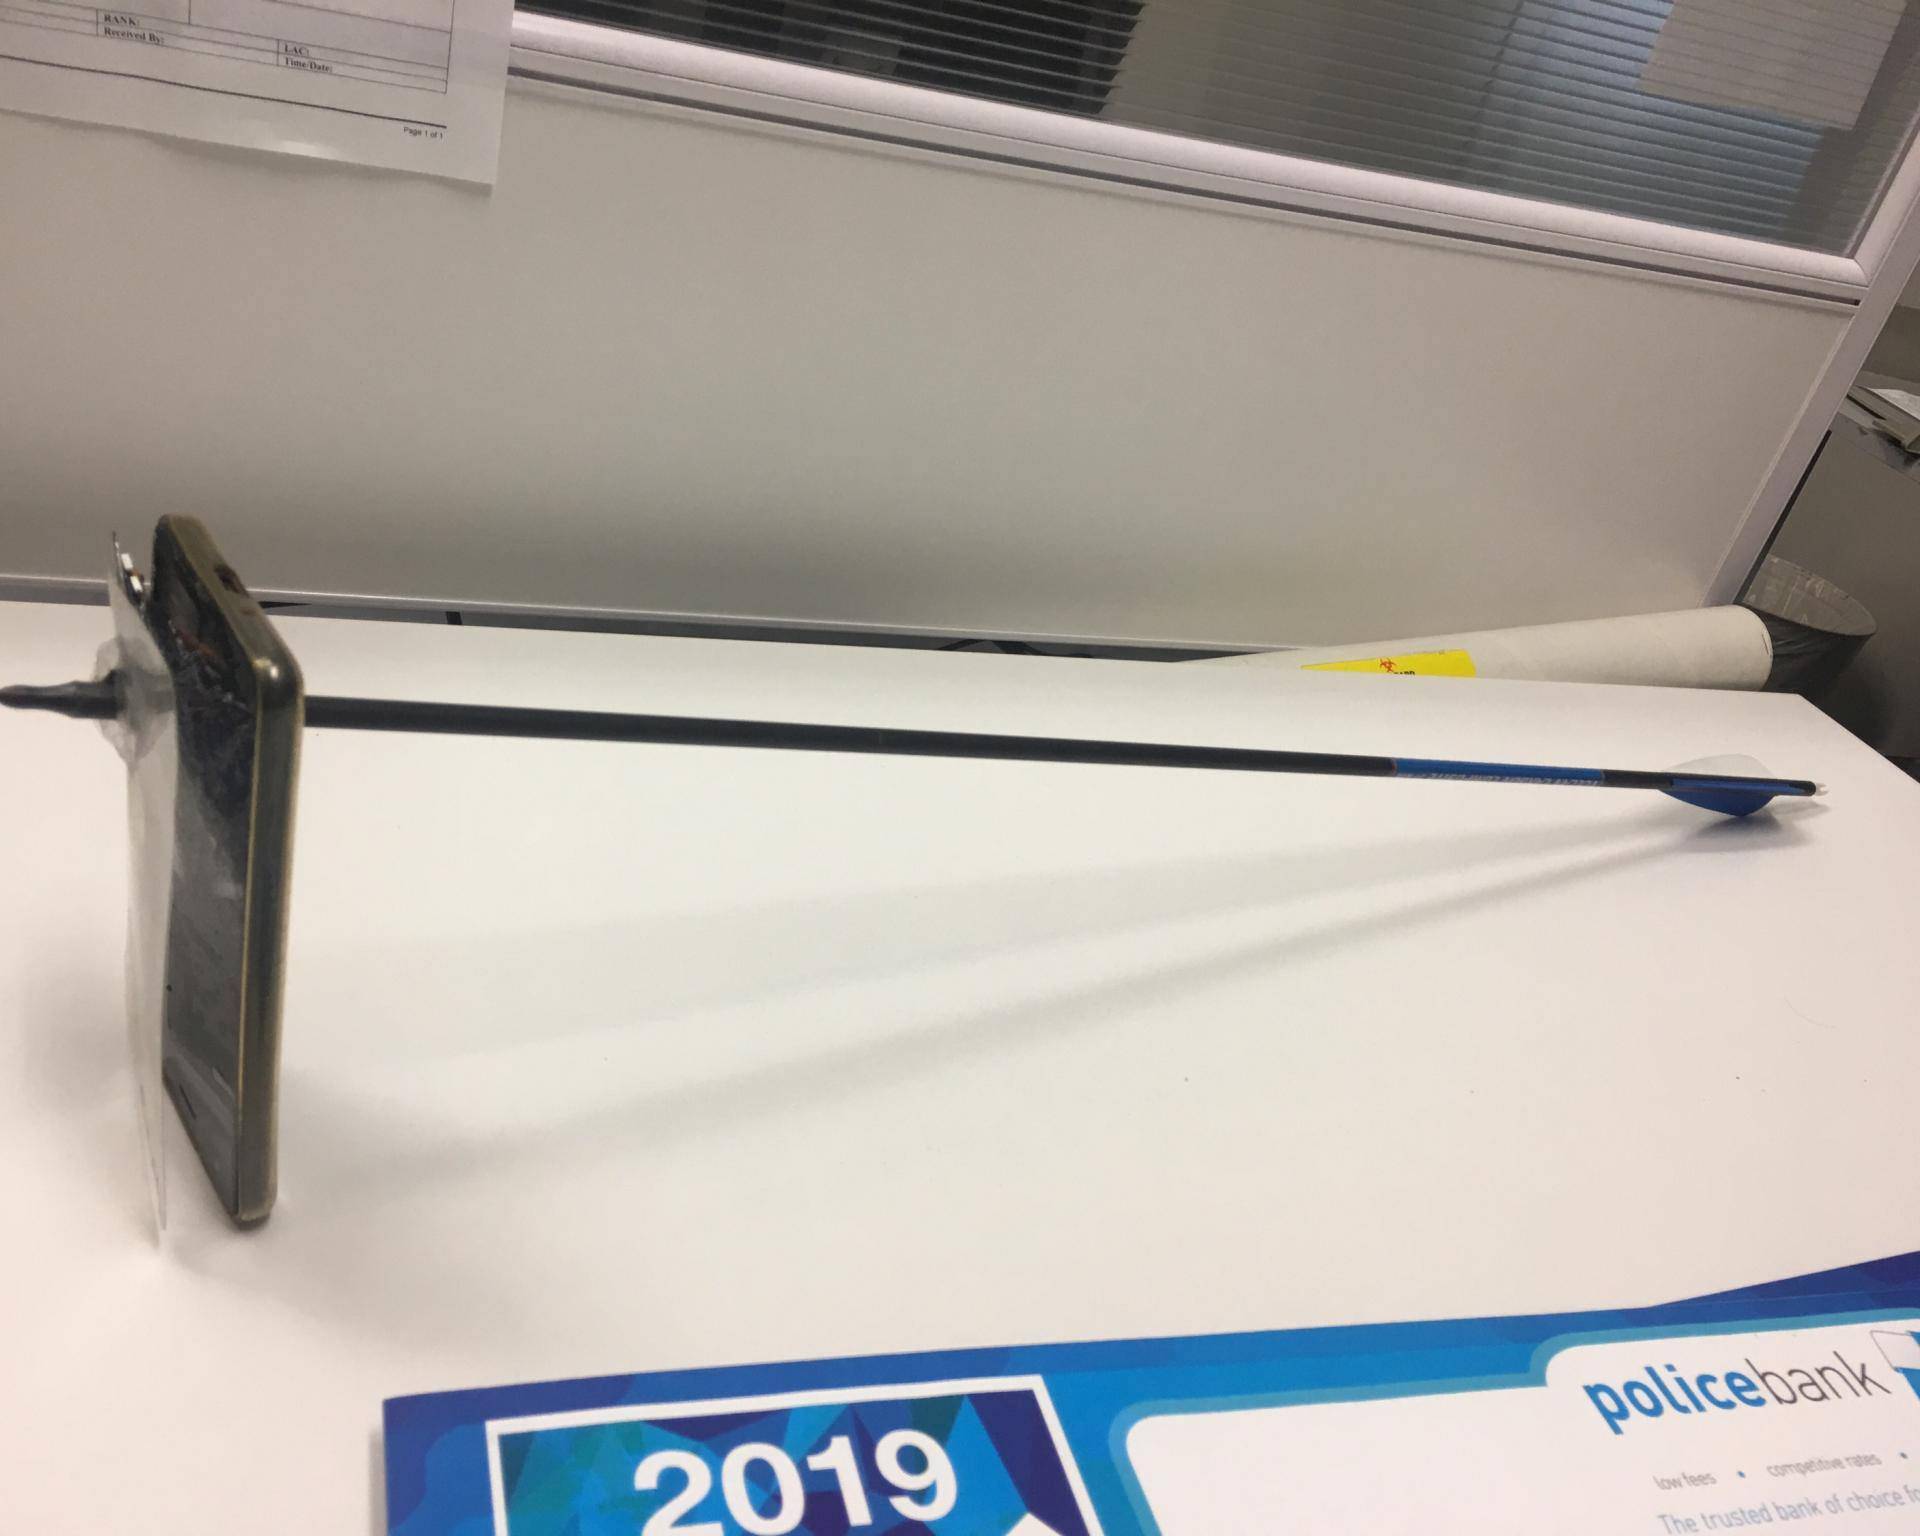 A picture shows an arrow that pierced a mobile telephone after accident in Nimbin